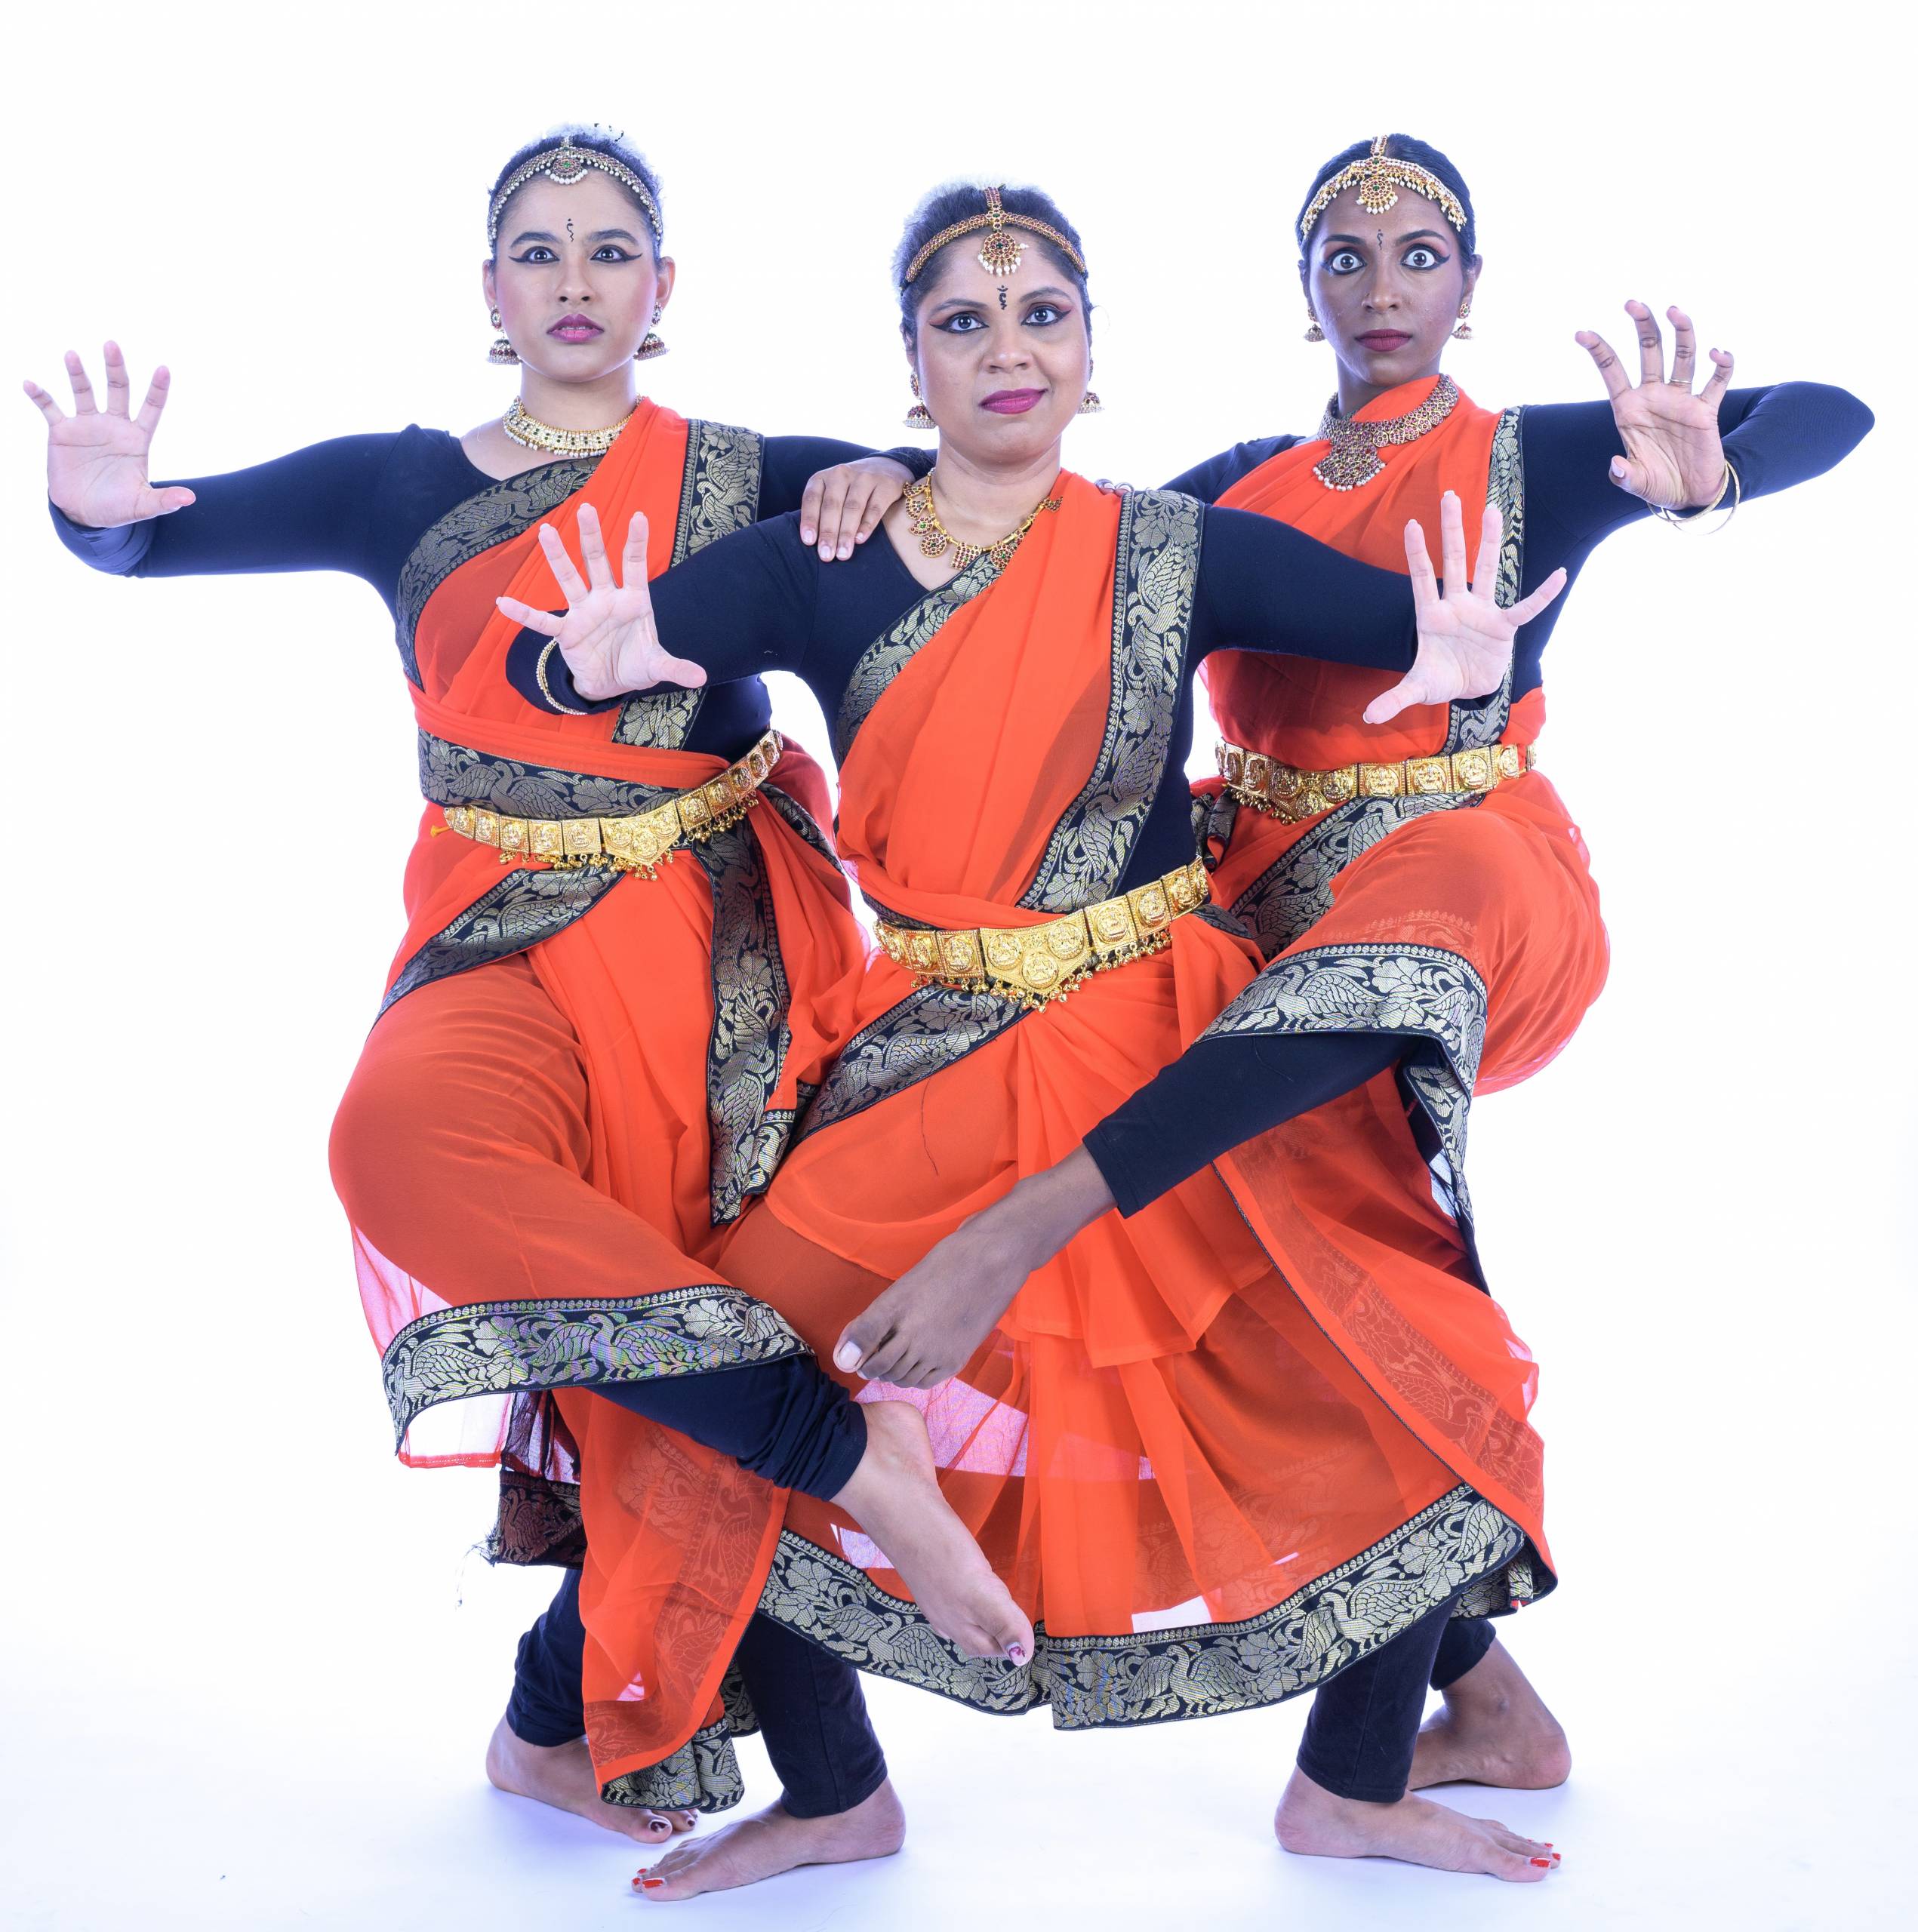 Three Indian dancers in bright orange costumes pose together